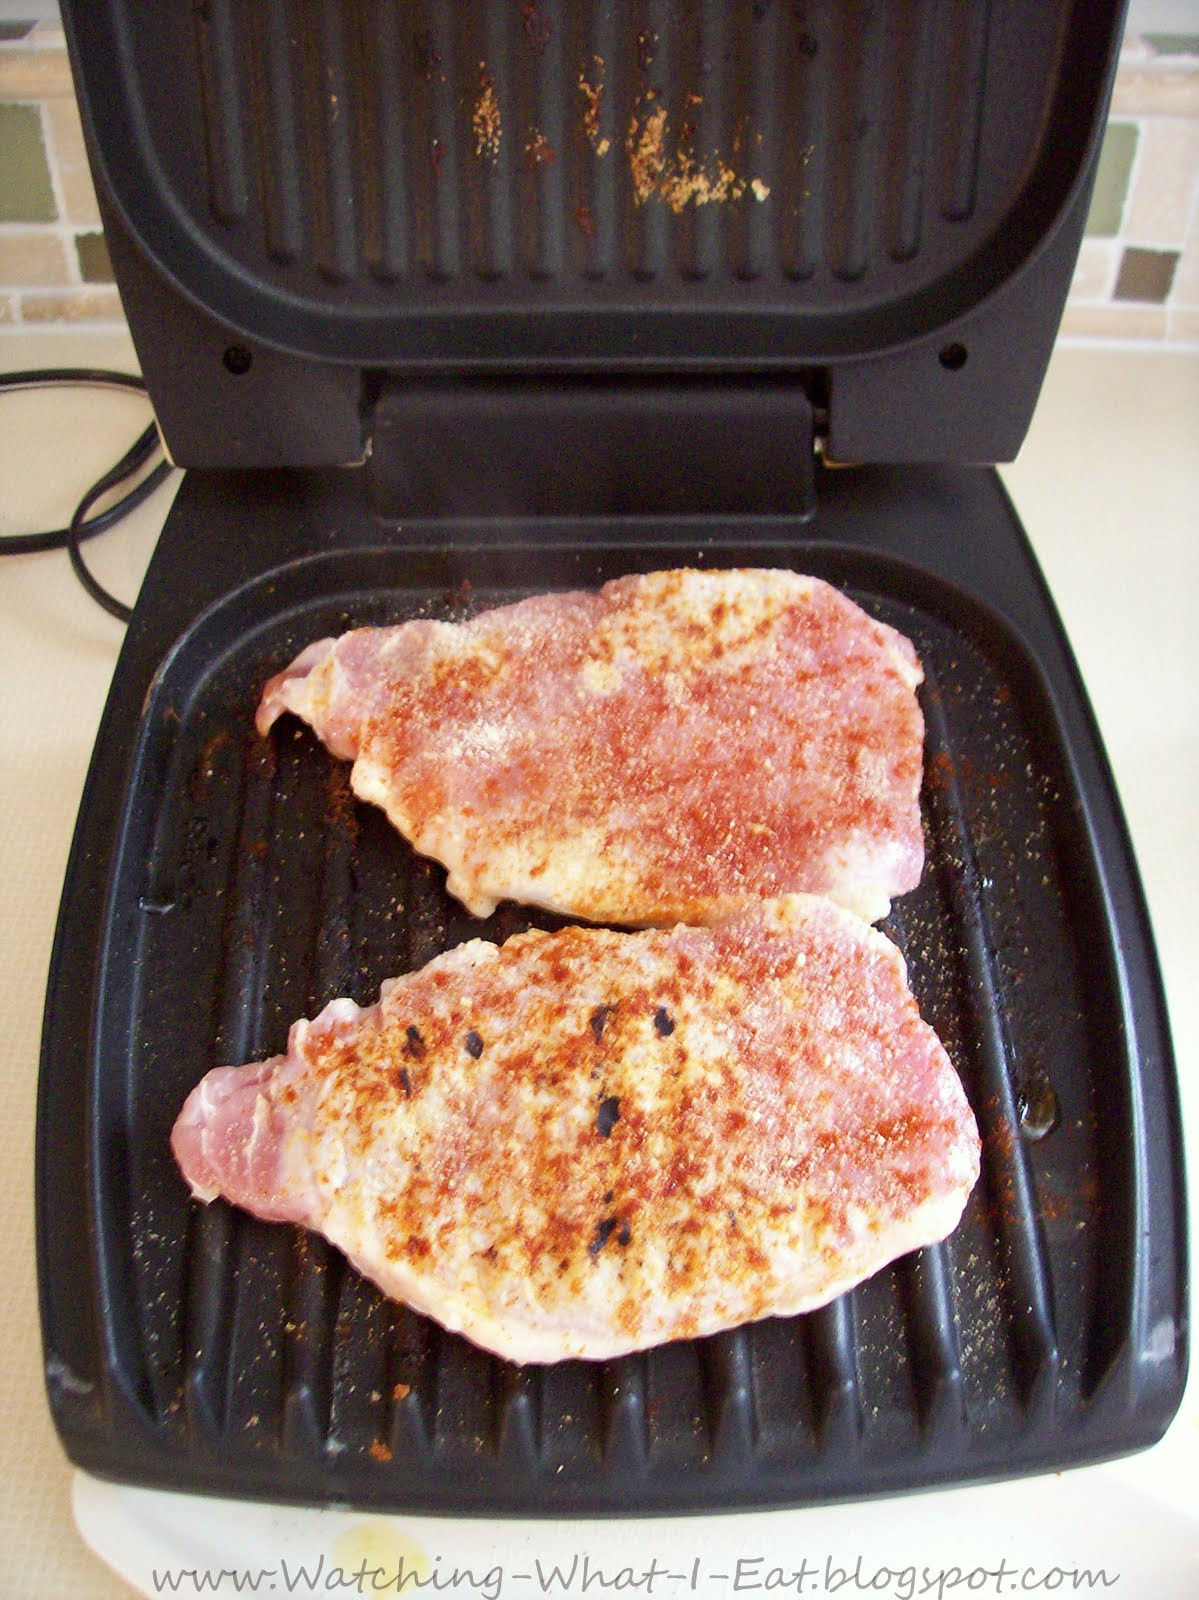 Pork Chops On George Foreman Grill
 Watching What I Eat Grilled Pork Chops Peaches & Cabbage